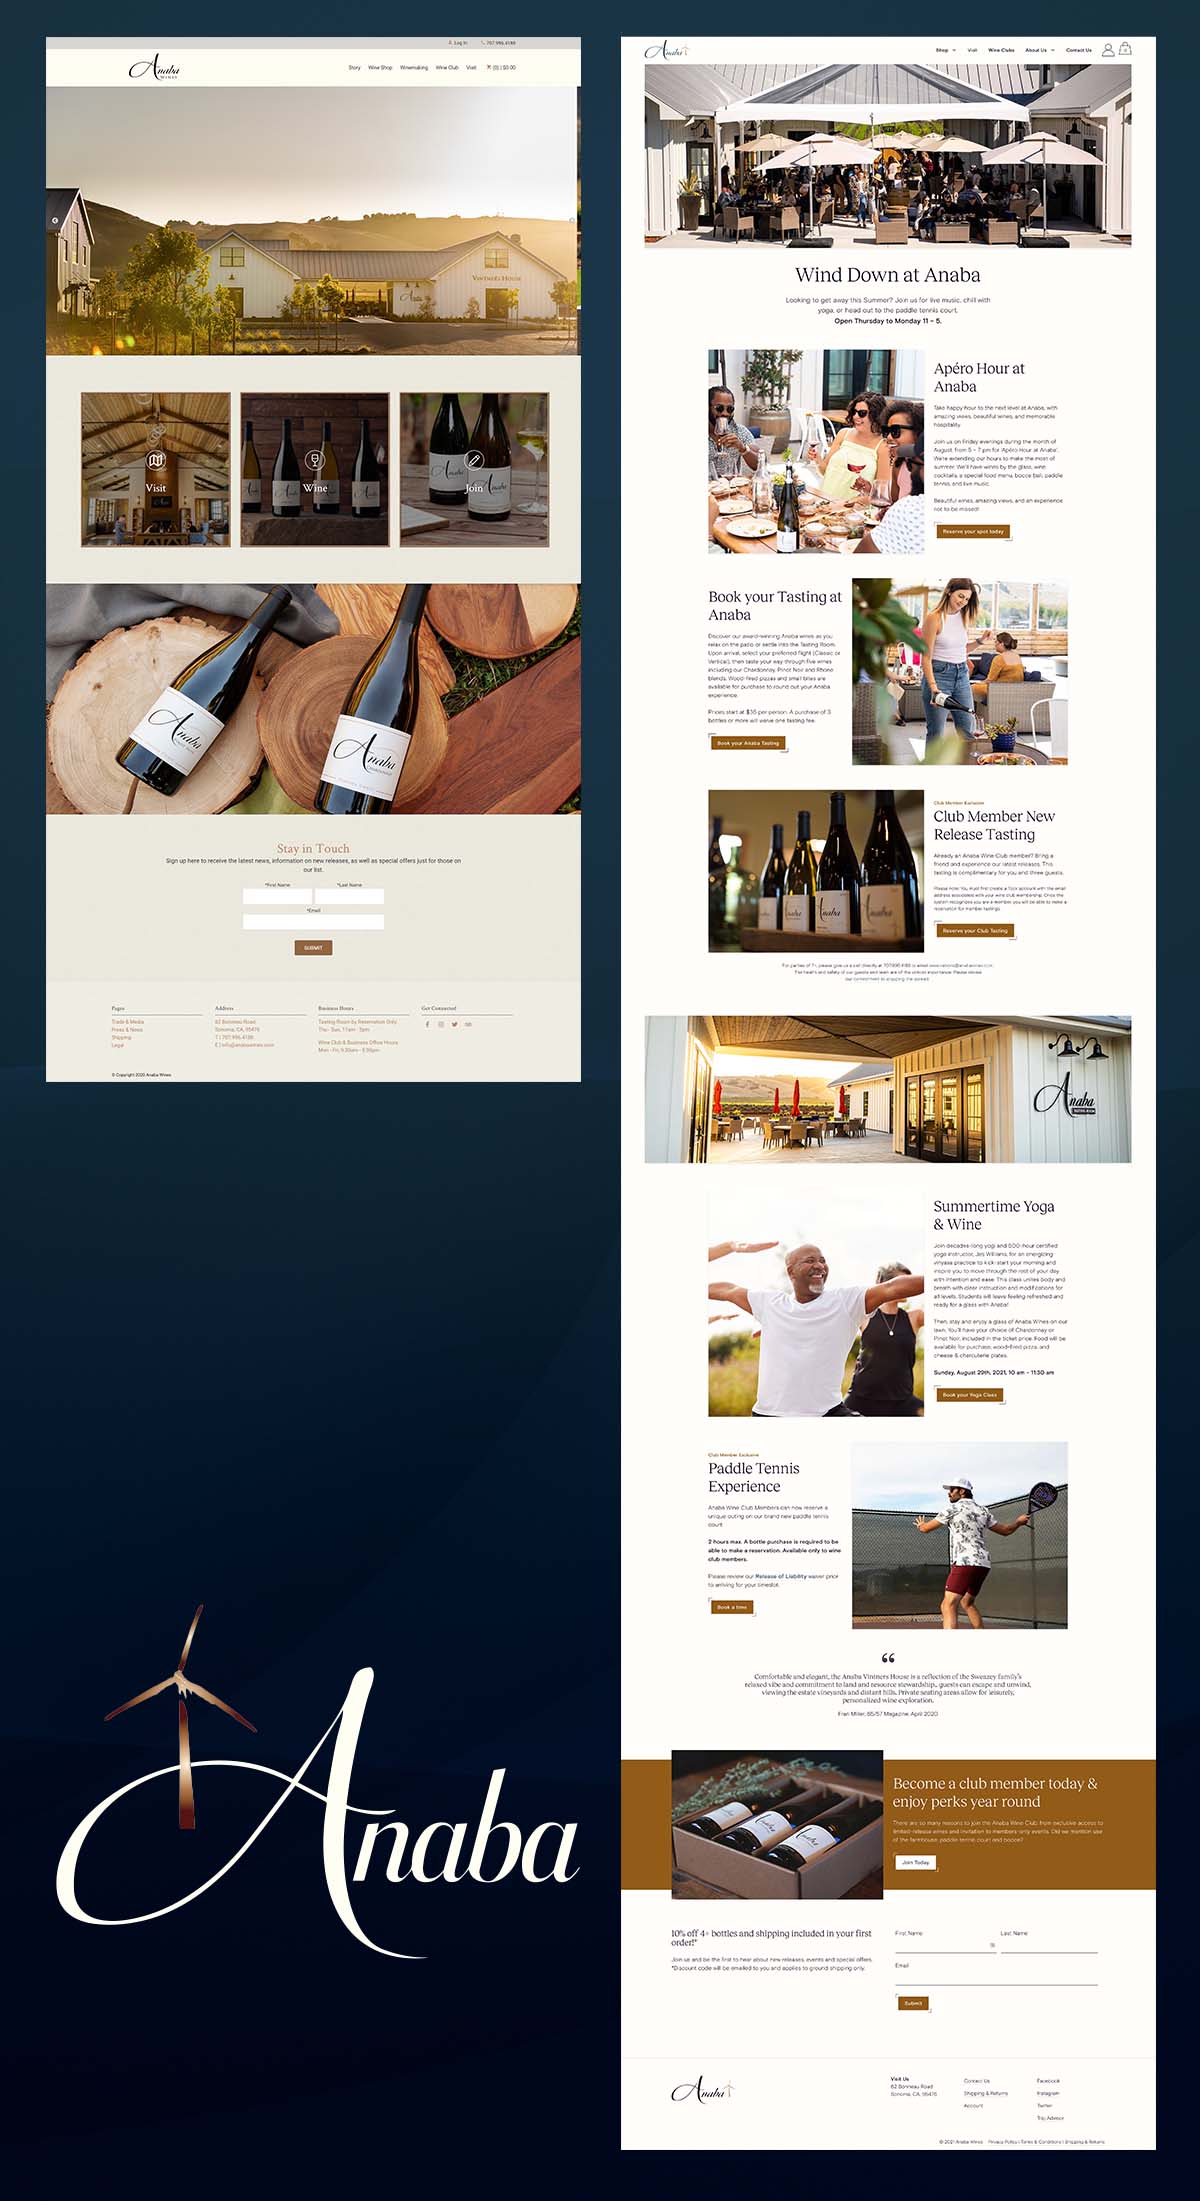 A comparison image showing the Anaba Wines website before and after 5forests redesigned it.